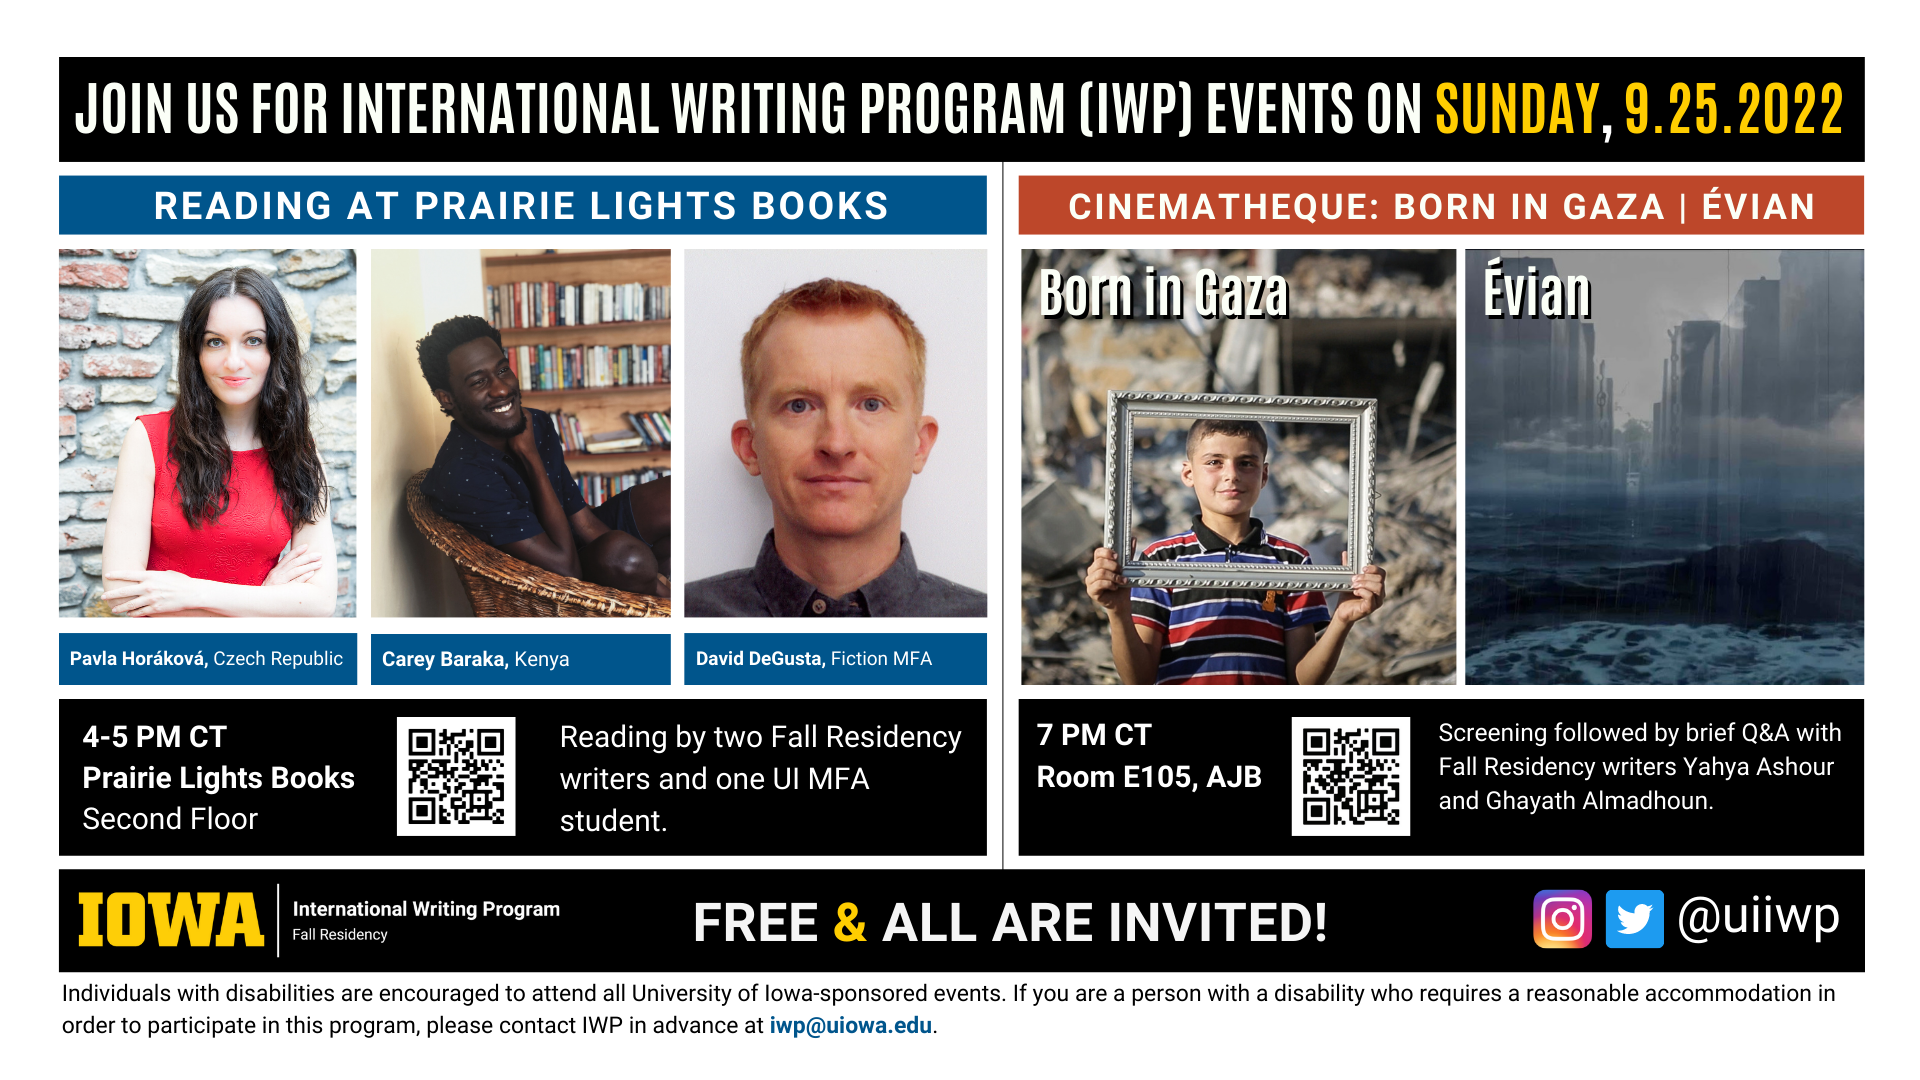 An image with two halves, each advertising one event. The image as a whole is labeled "Join us for International Writing Program (IWP) Events on Sunday, 9.25.2022. The left half left of the image is labeled "Reading at Prairie Lights Books." There are portraits of three writers (named below) and the following text: " Pavla Horáková, Czech Republic. Carey Baraka, Kenya. David DeGusta, Fiction MFA. 4-5 PM CT Prairie Lights Books, Second Floor. Reading by two Fall Residency writers and one UI MFA student." The right half of the image is labeled "Born in Gaza" and “Évian.” Below that heading there are a screenshots from the films of those names; on the left, a young boy in front of a pile of rubble holding a picture frame in front of himself so as to frame a portrait, and on the right, what appears to be a dark city half-submerged in ocean water. The following text appears below: "7 PM CT, Room E105 AJB. Screening followed by brief Q&A with Fall Residency writers Yahya Ashour and Ghayath Almadhoun." Below that text there are the IWP Fall Residency logo, the Instagram and Twitter handle @uiiwp, and a note that the event is “Free & All Are Invited.” The following text is at the bottom of the image: "Individuals with disabilities are encouraged to attend all University of Iowa-sponsored events. If you are a person with a disability who requires a reasonable accommodation in order to participate in this program, please contact IWP in advance at iwp@uiowa.edu.